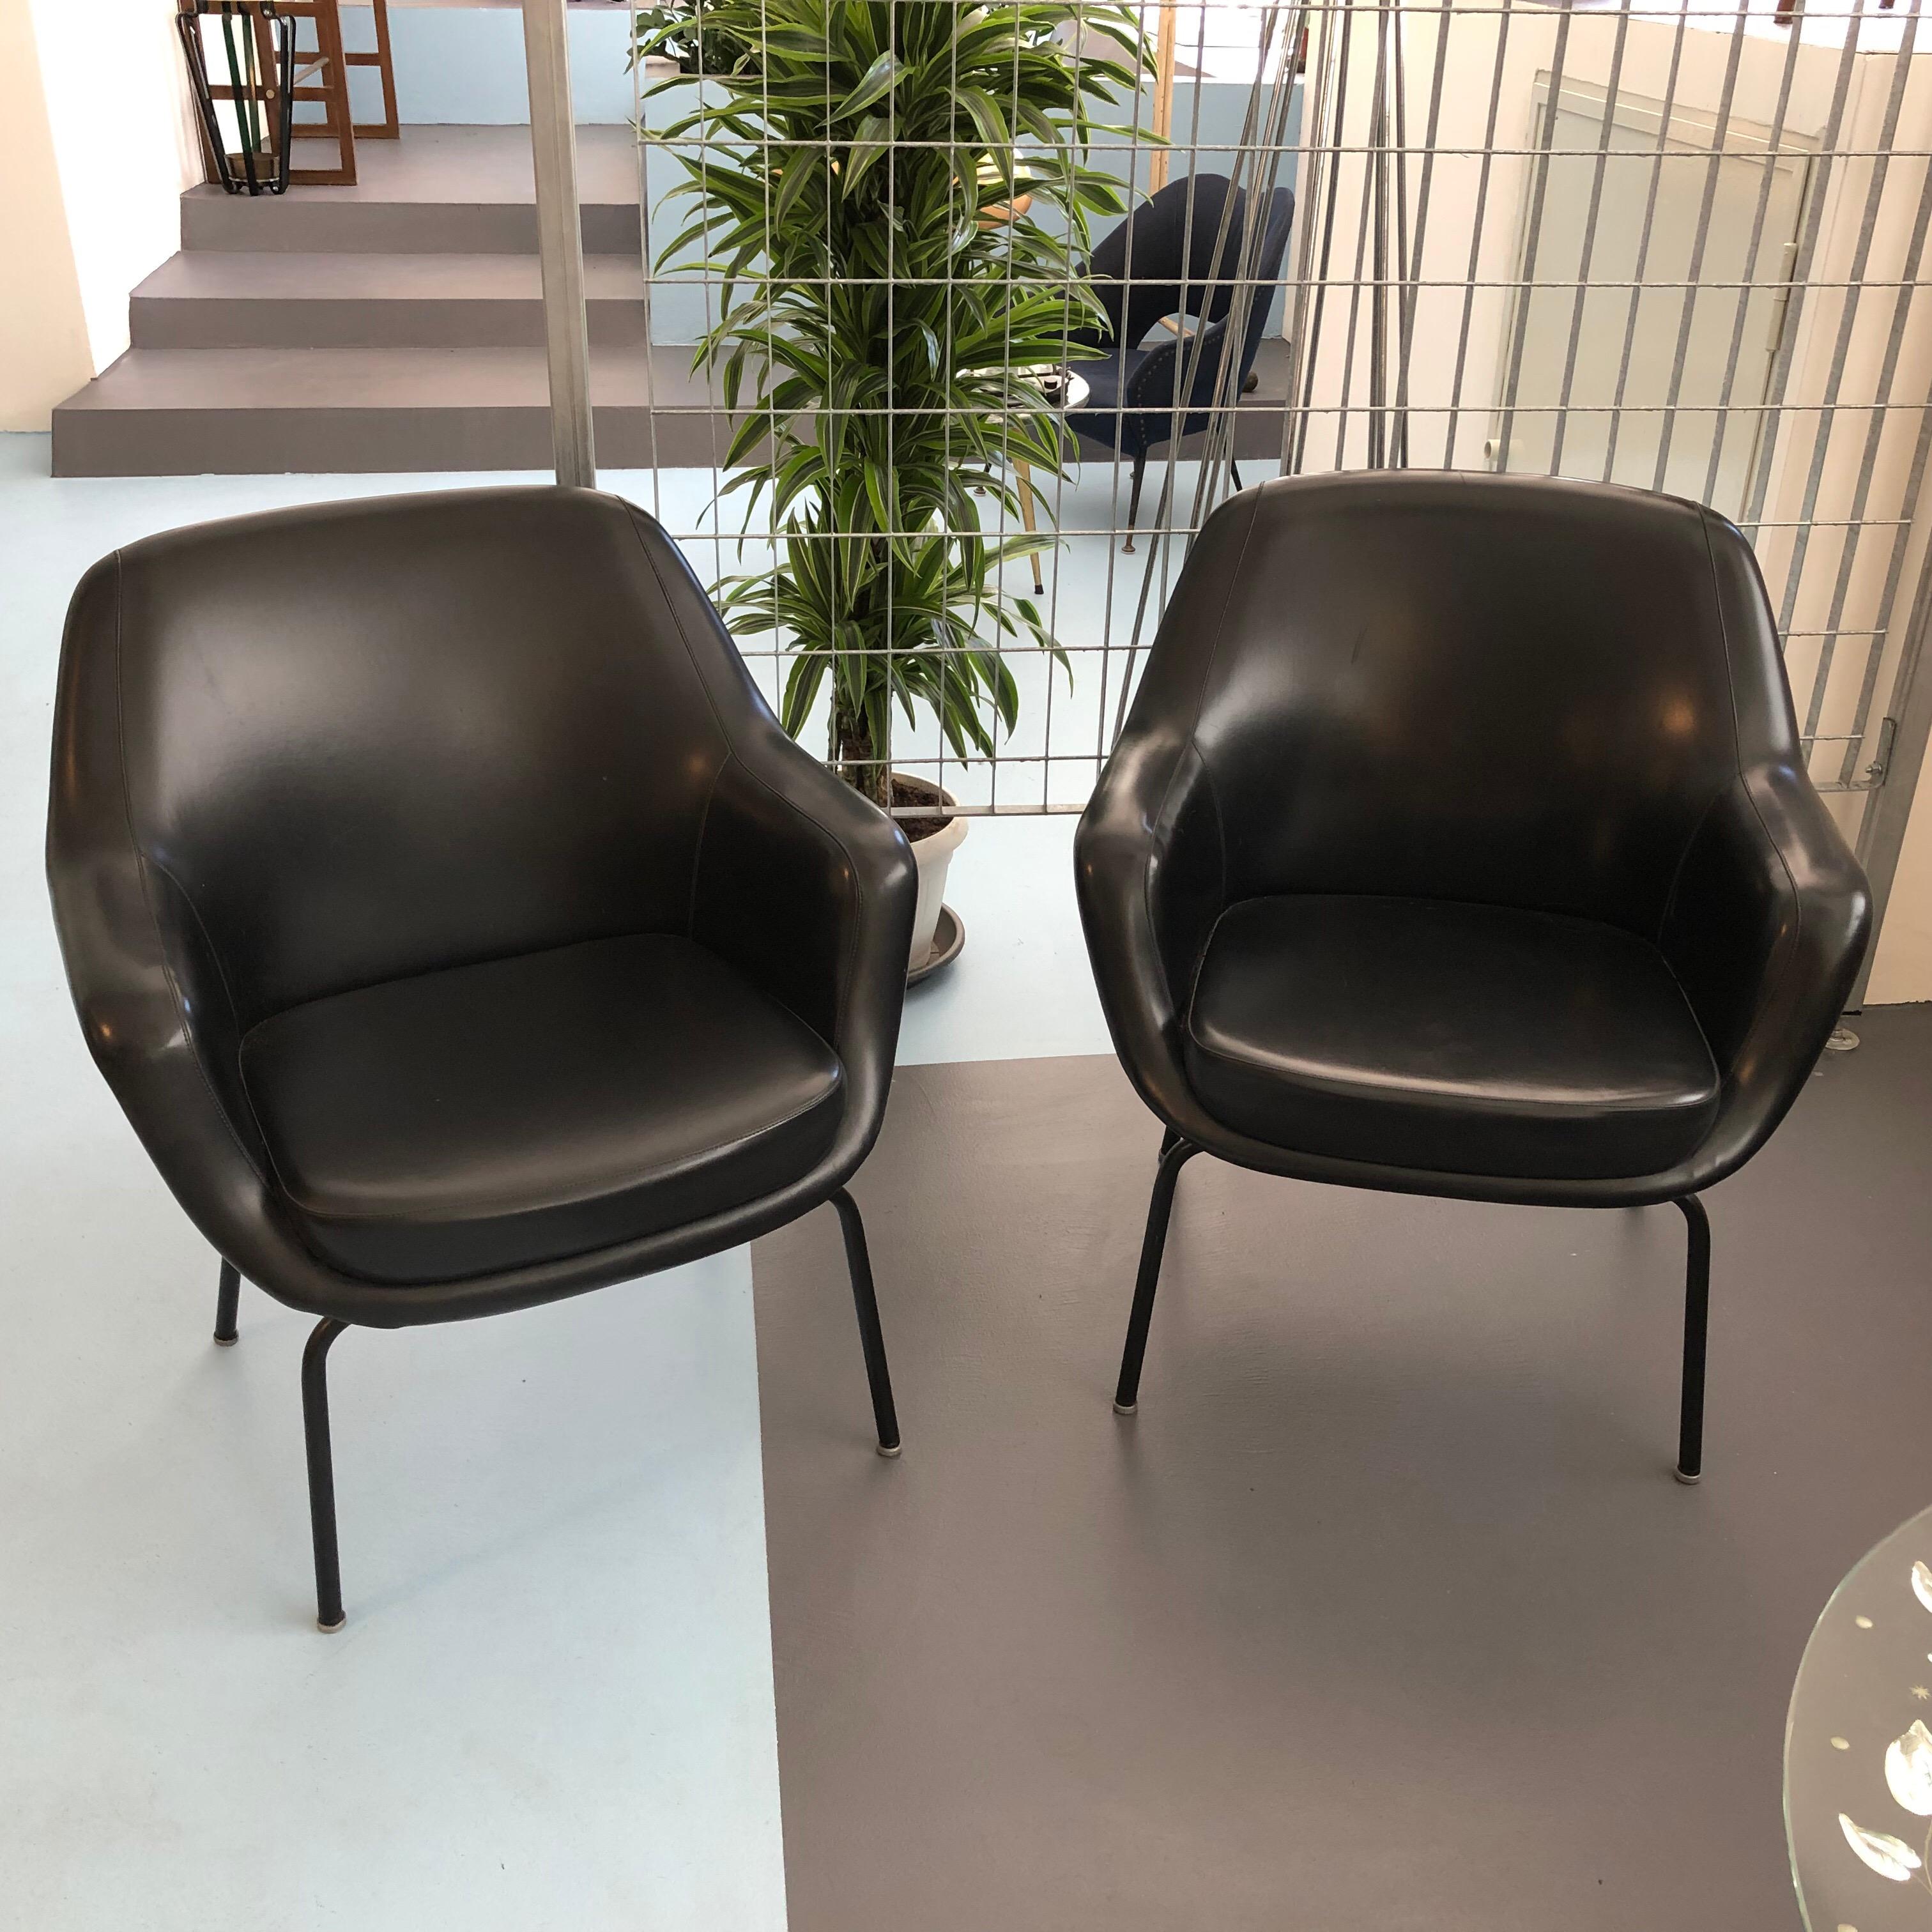 Pair of Olli Mannermaa Armchairs by Cassina, Italy, 1960s For Sale 5